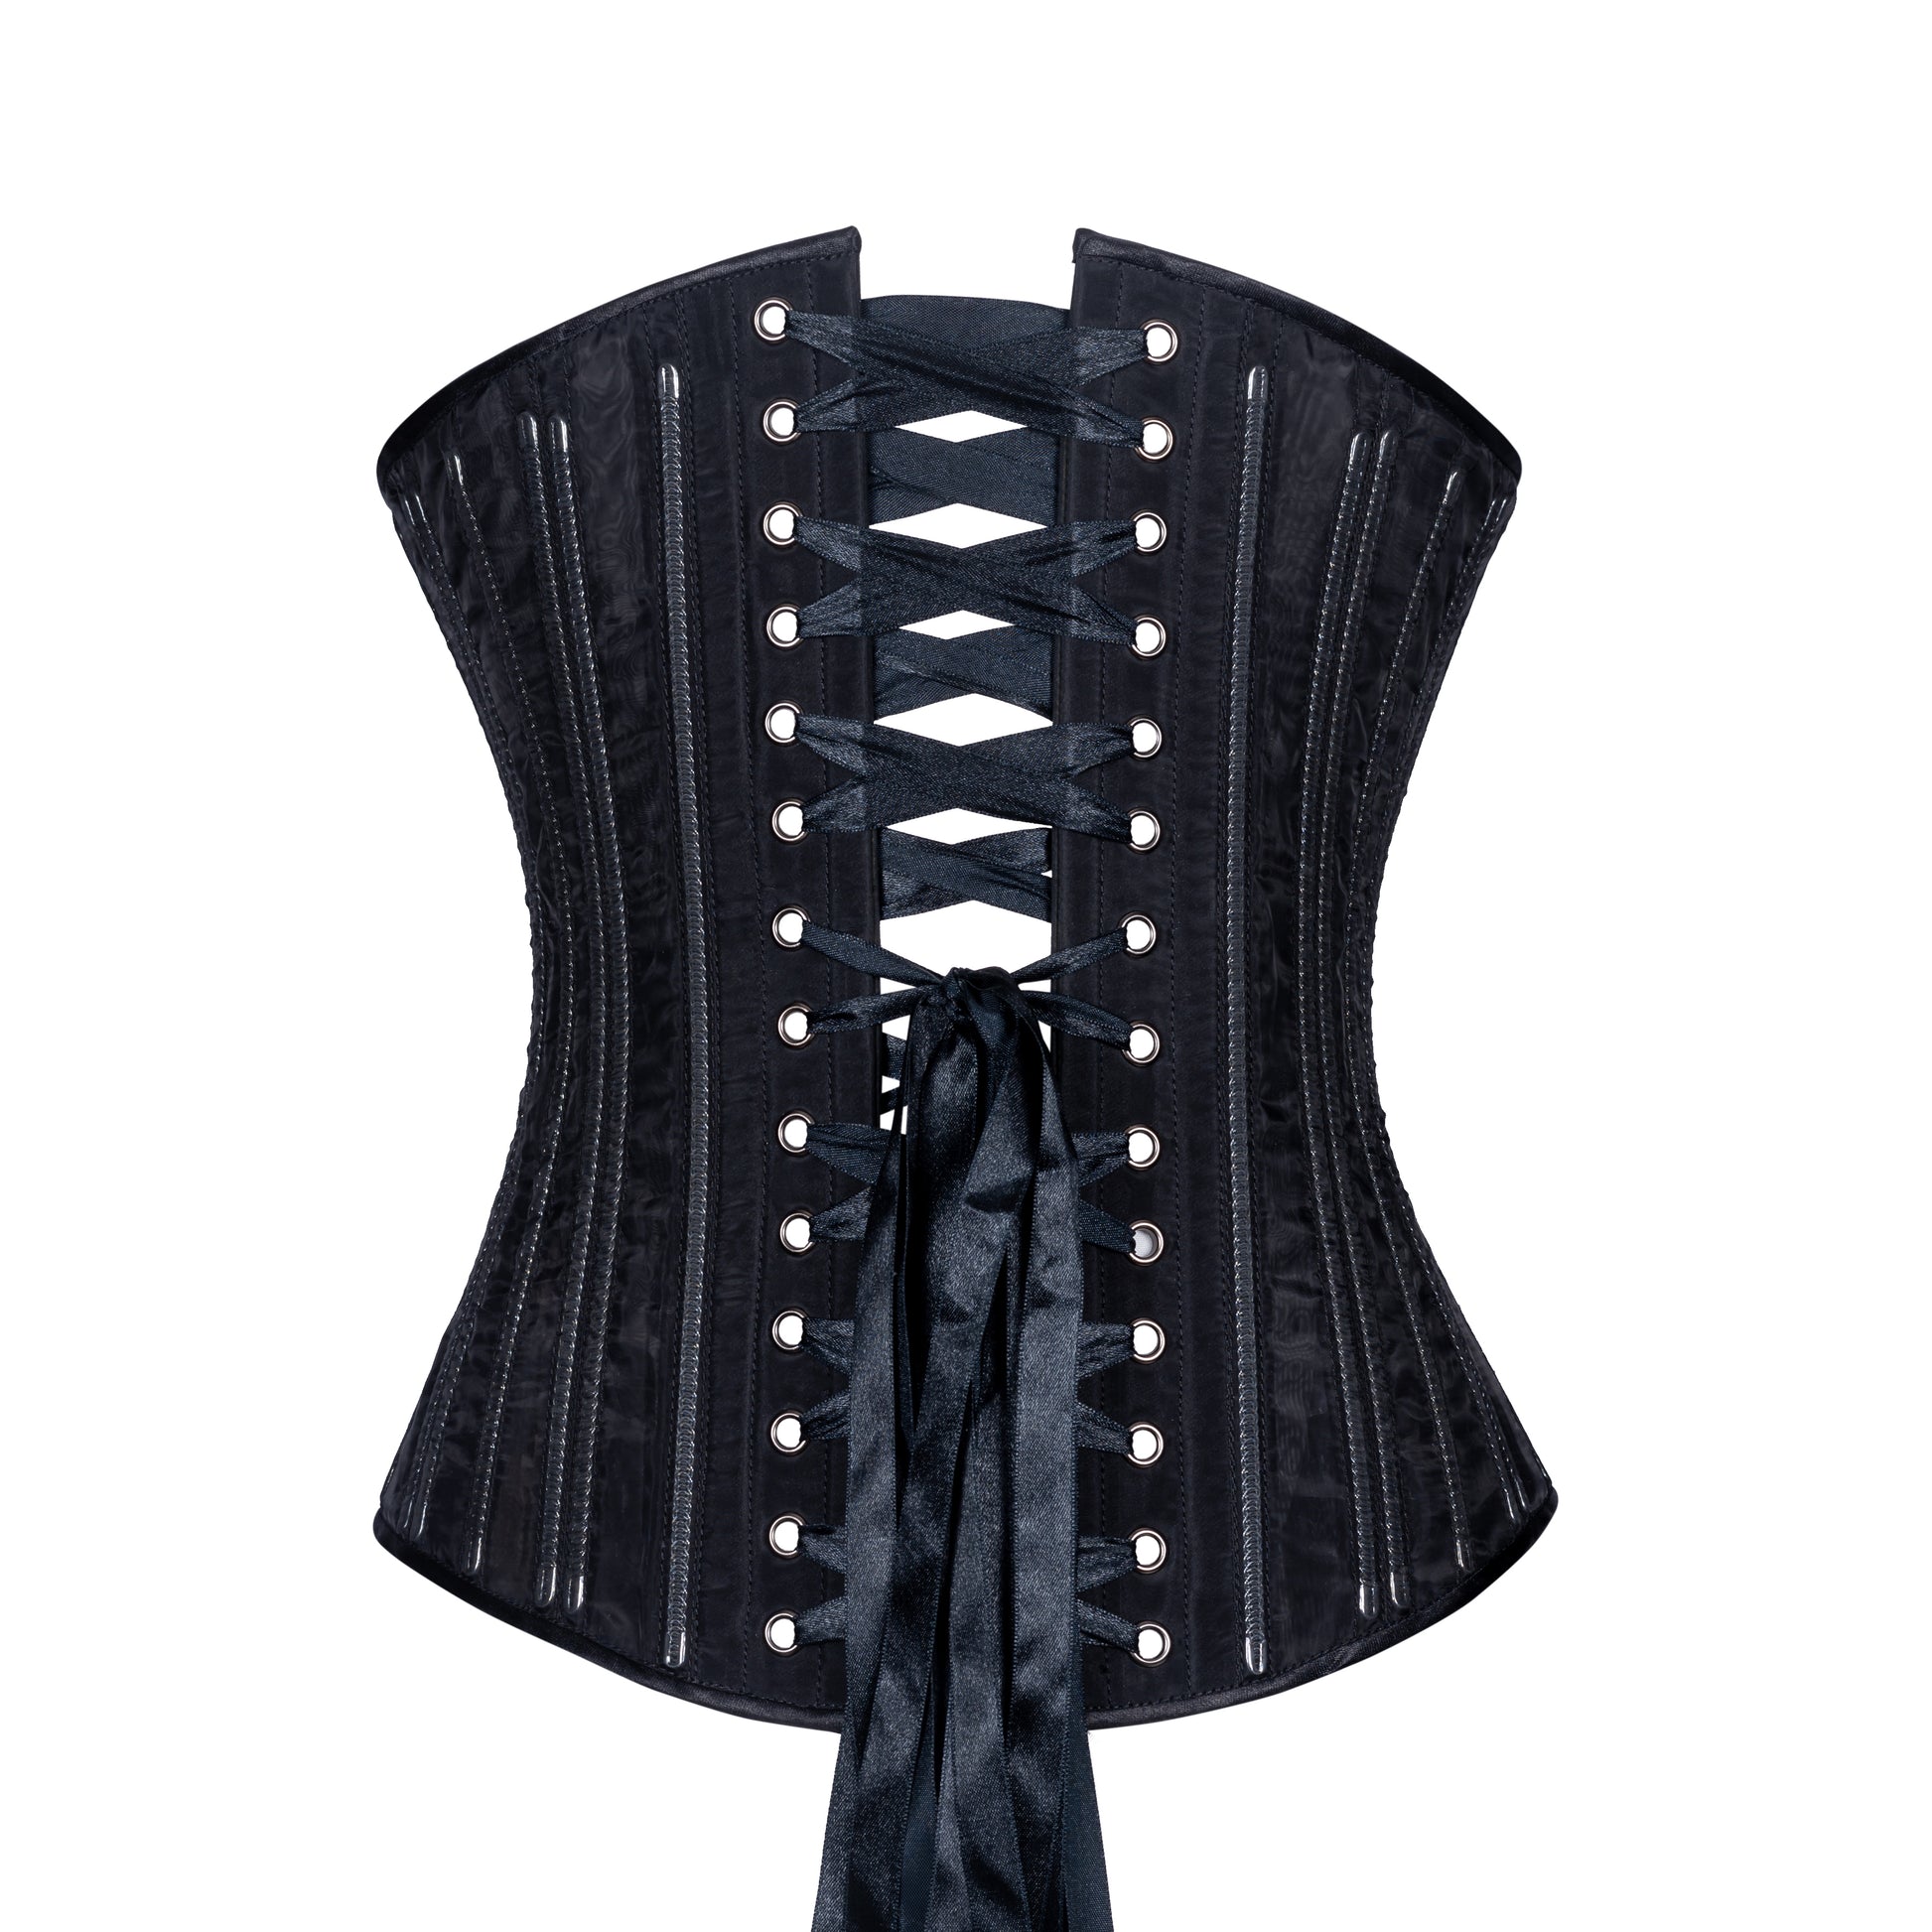 Mystic City Corsets.adding to my corset collection, can't wait